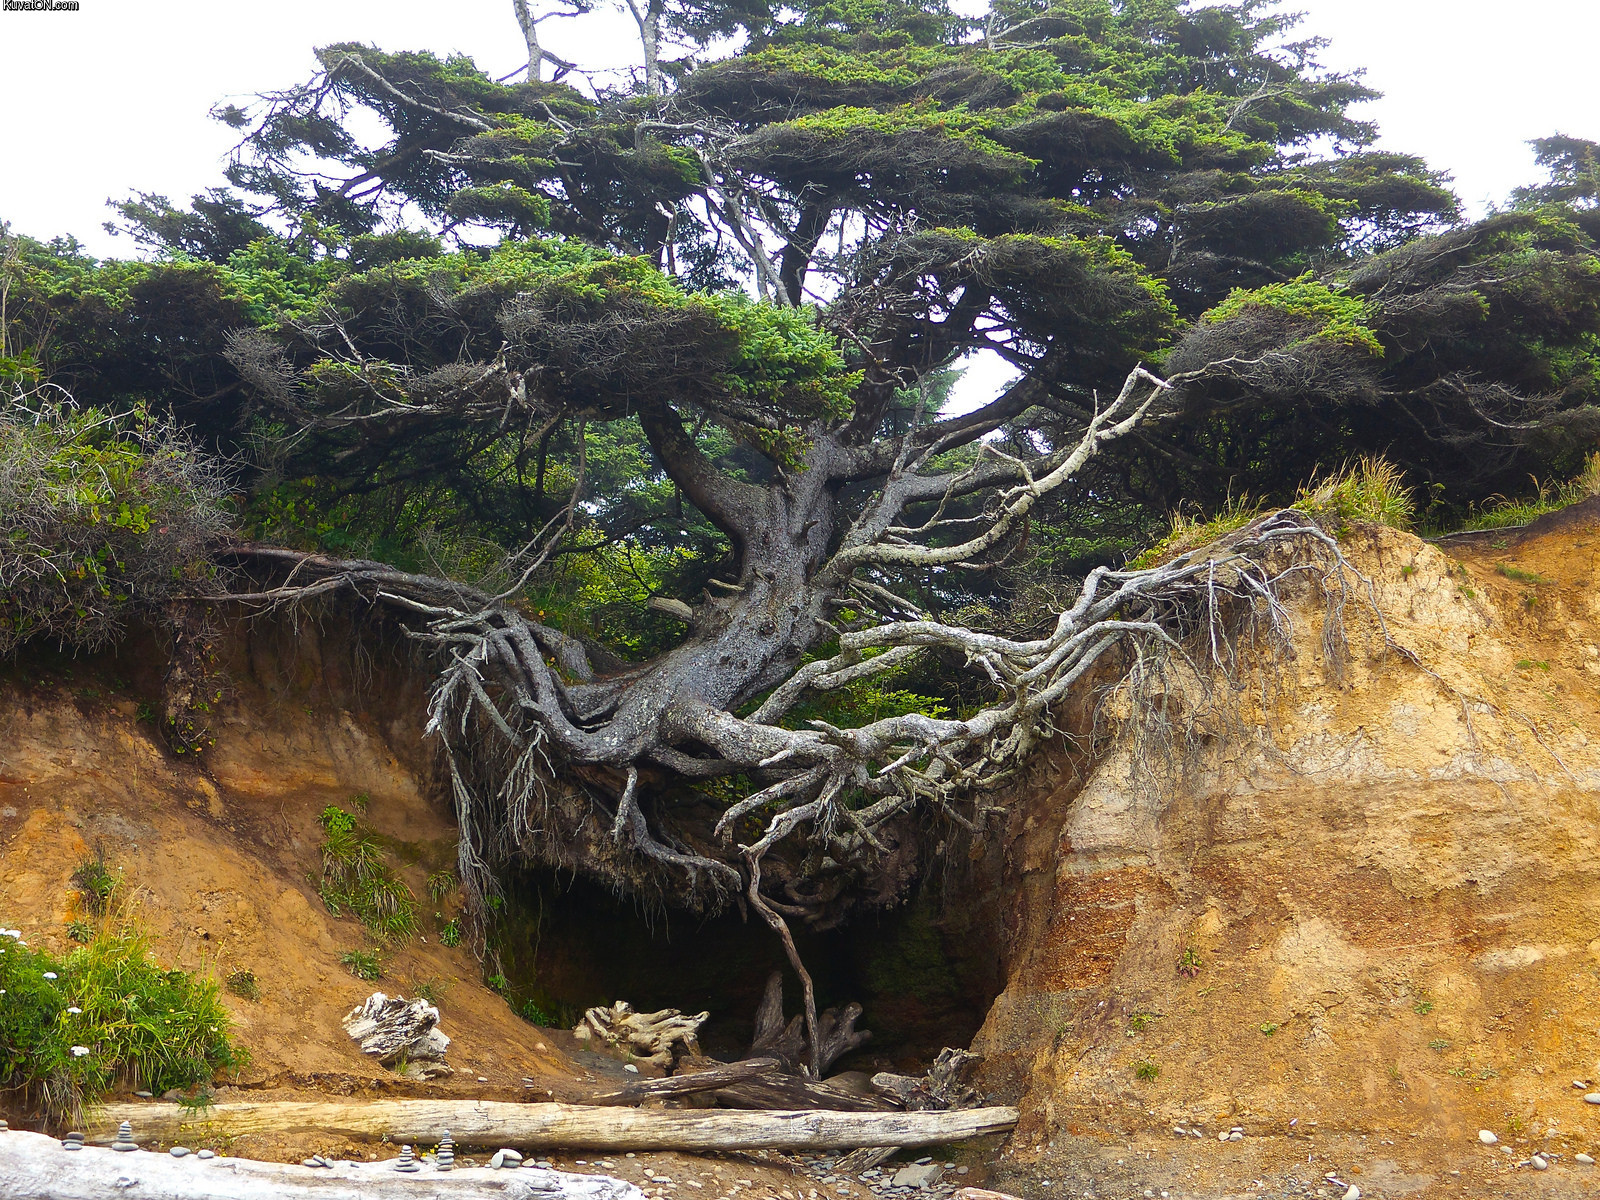 tree_fighting_against_erosion_on_the_beach_in_olympic_national_park_wa.jpg